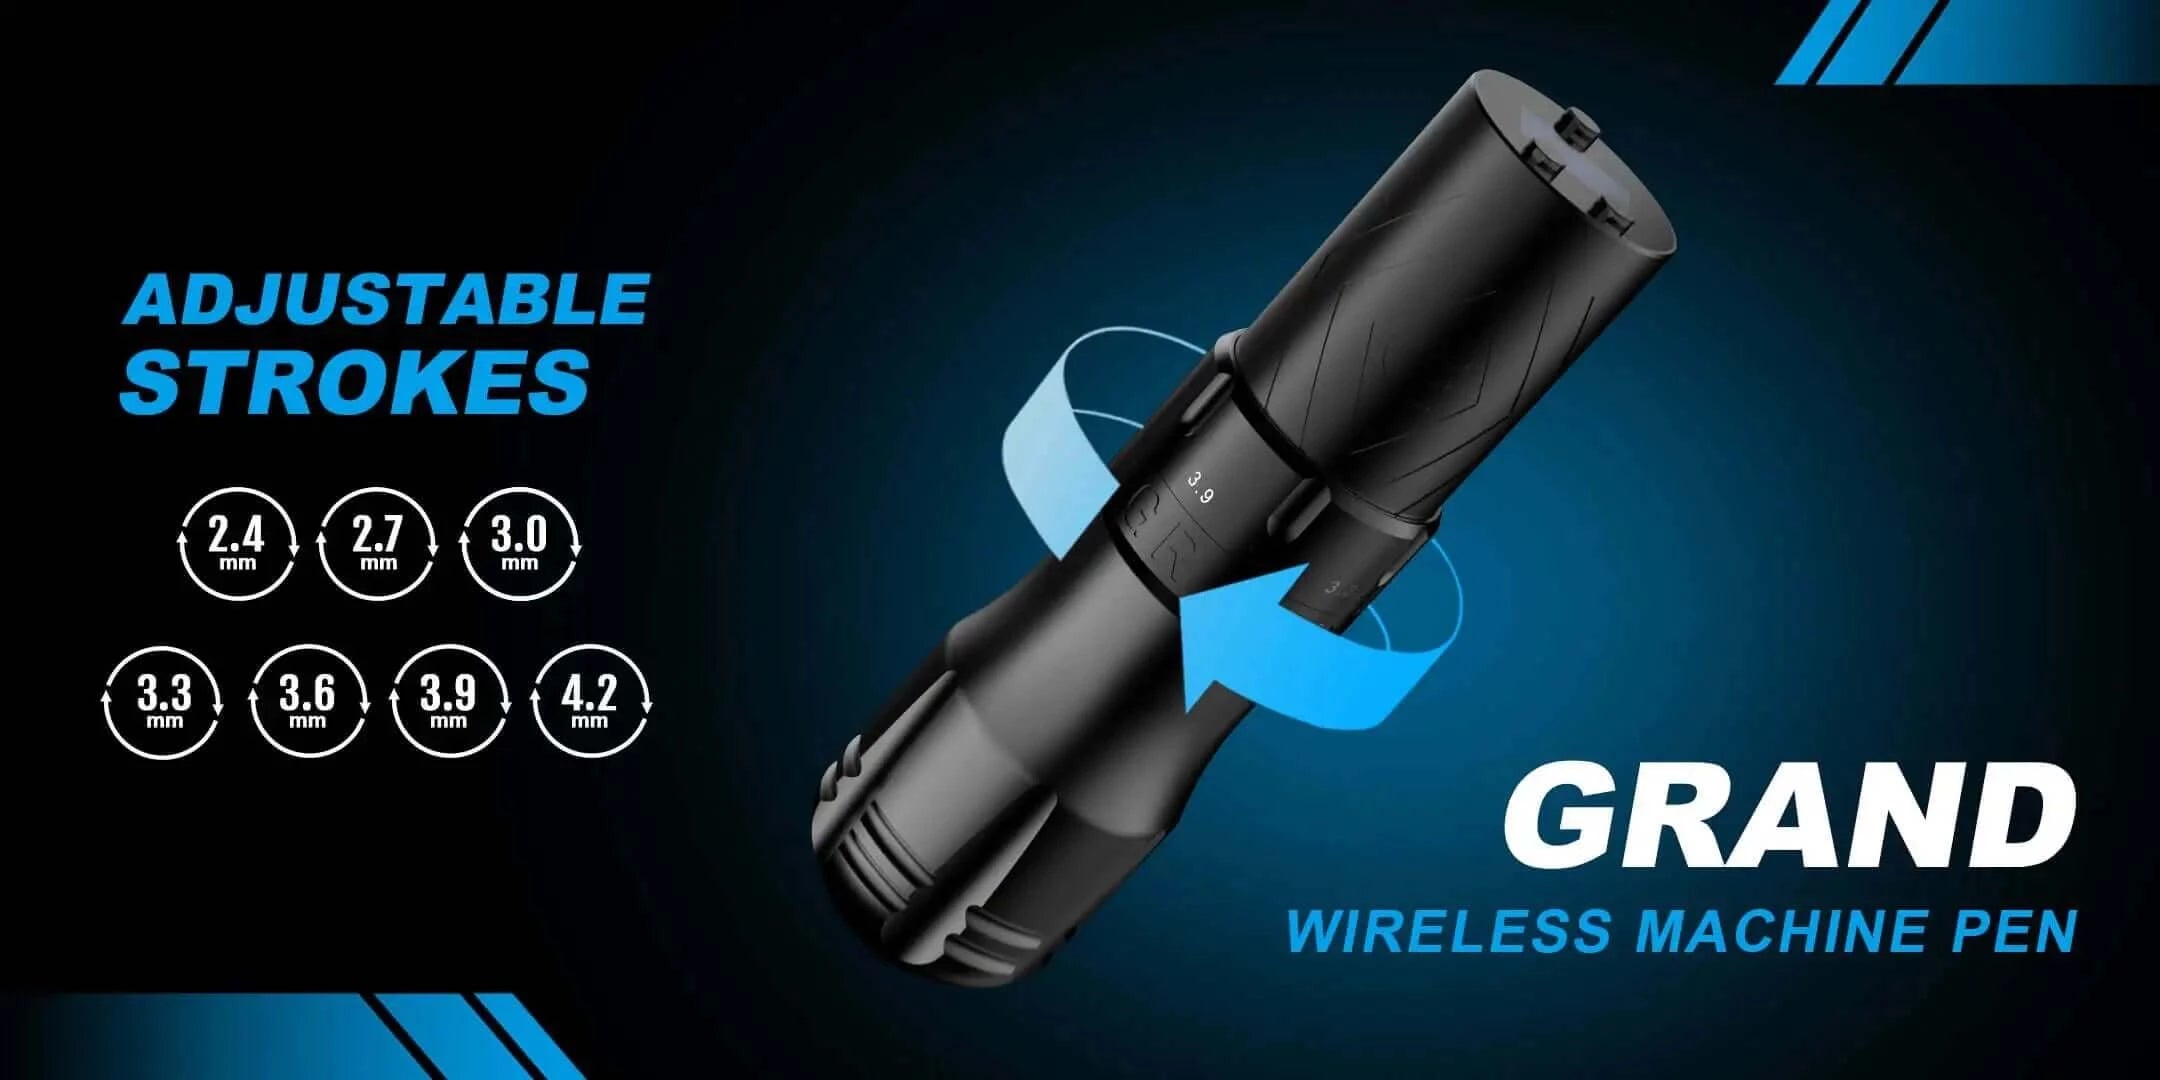  EMALLA GRAND Wireless Tattoo Pen Machine with adjustable strokes from 2.4mm to 4.2mm